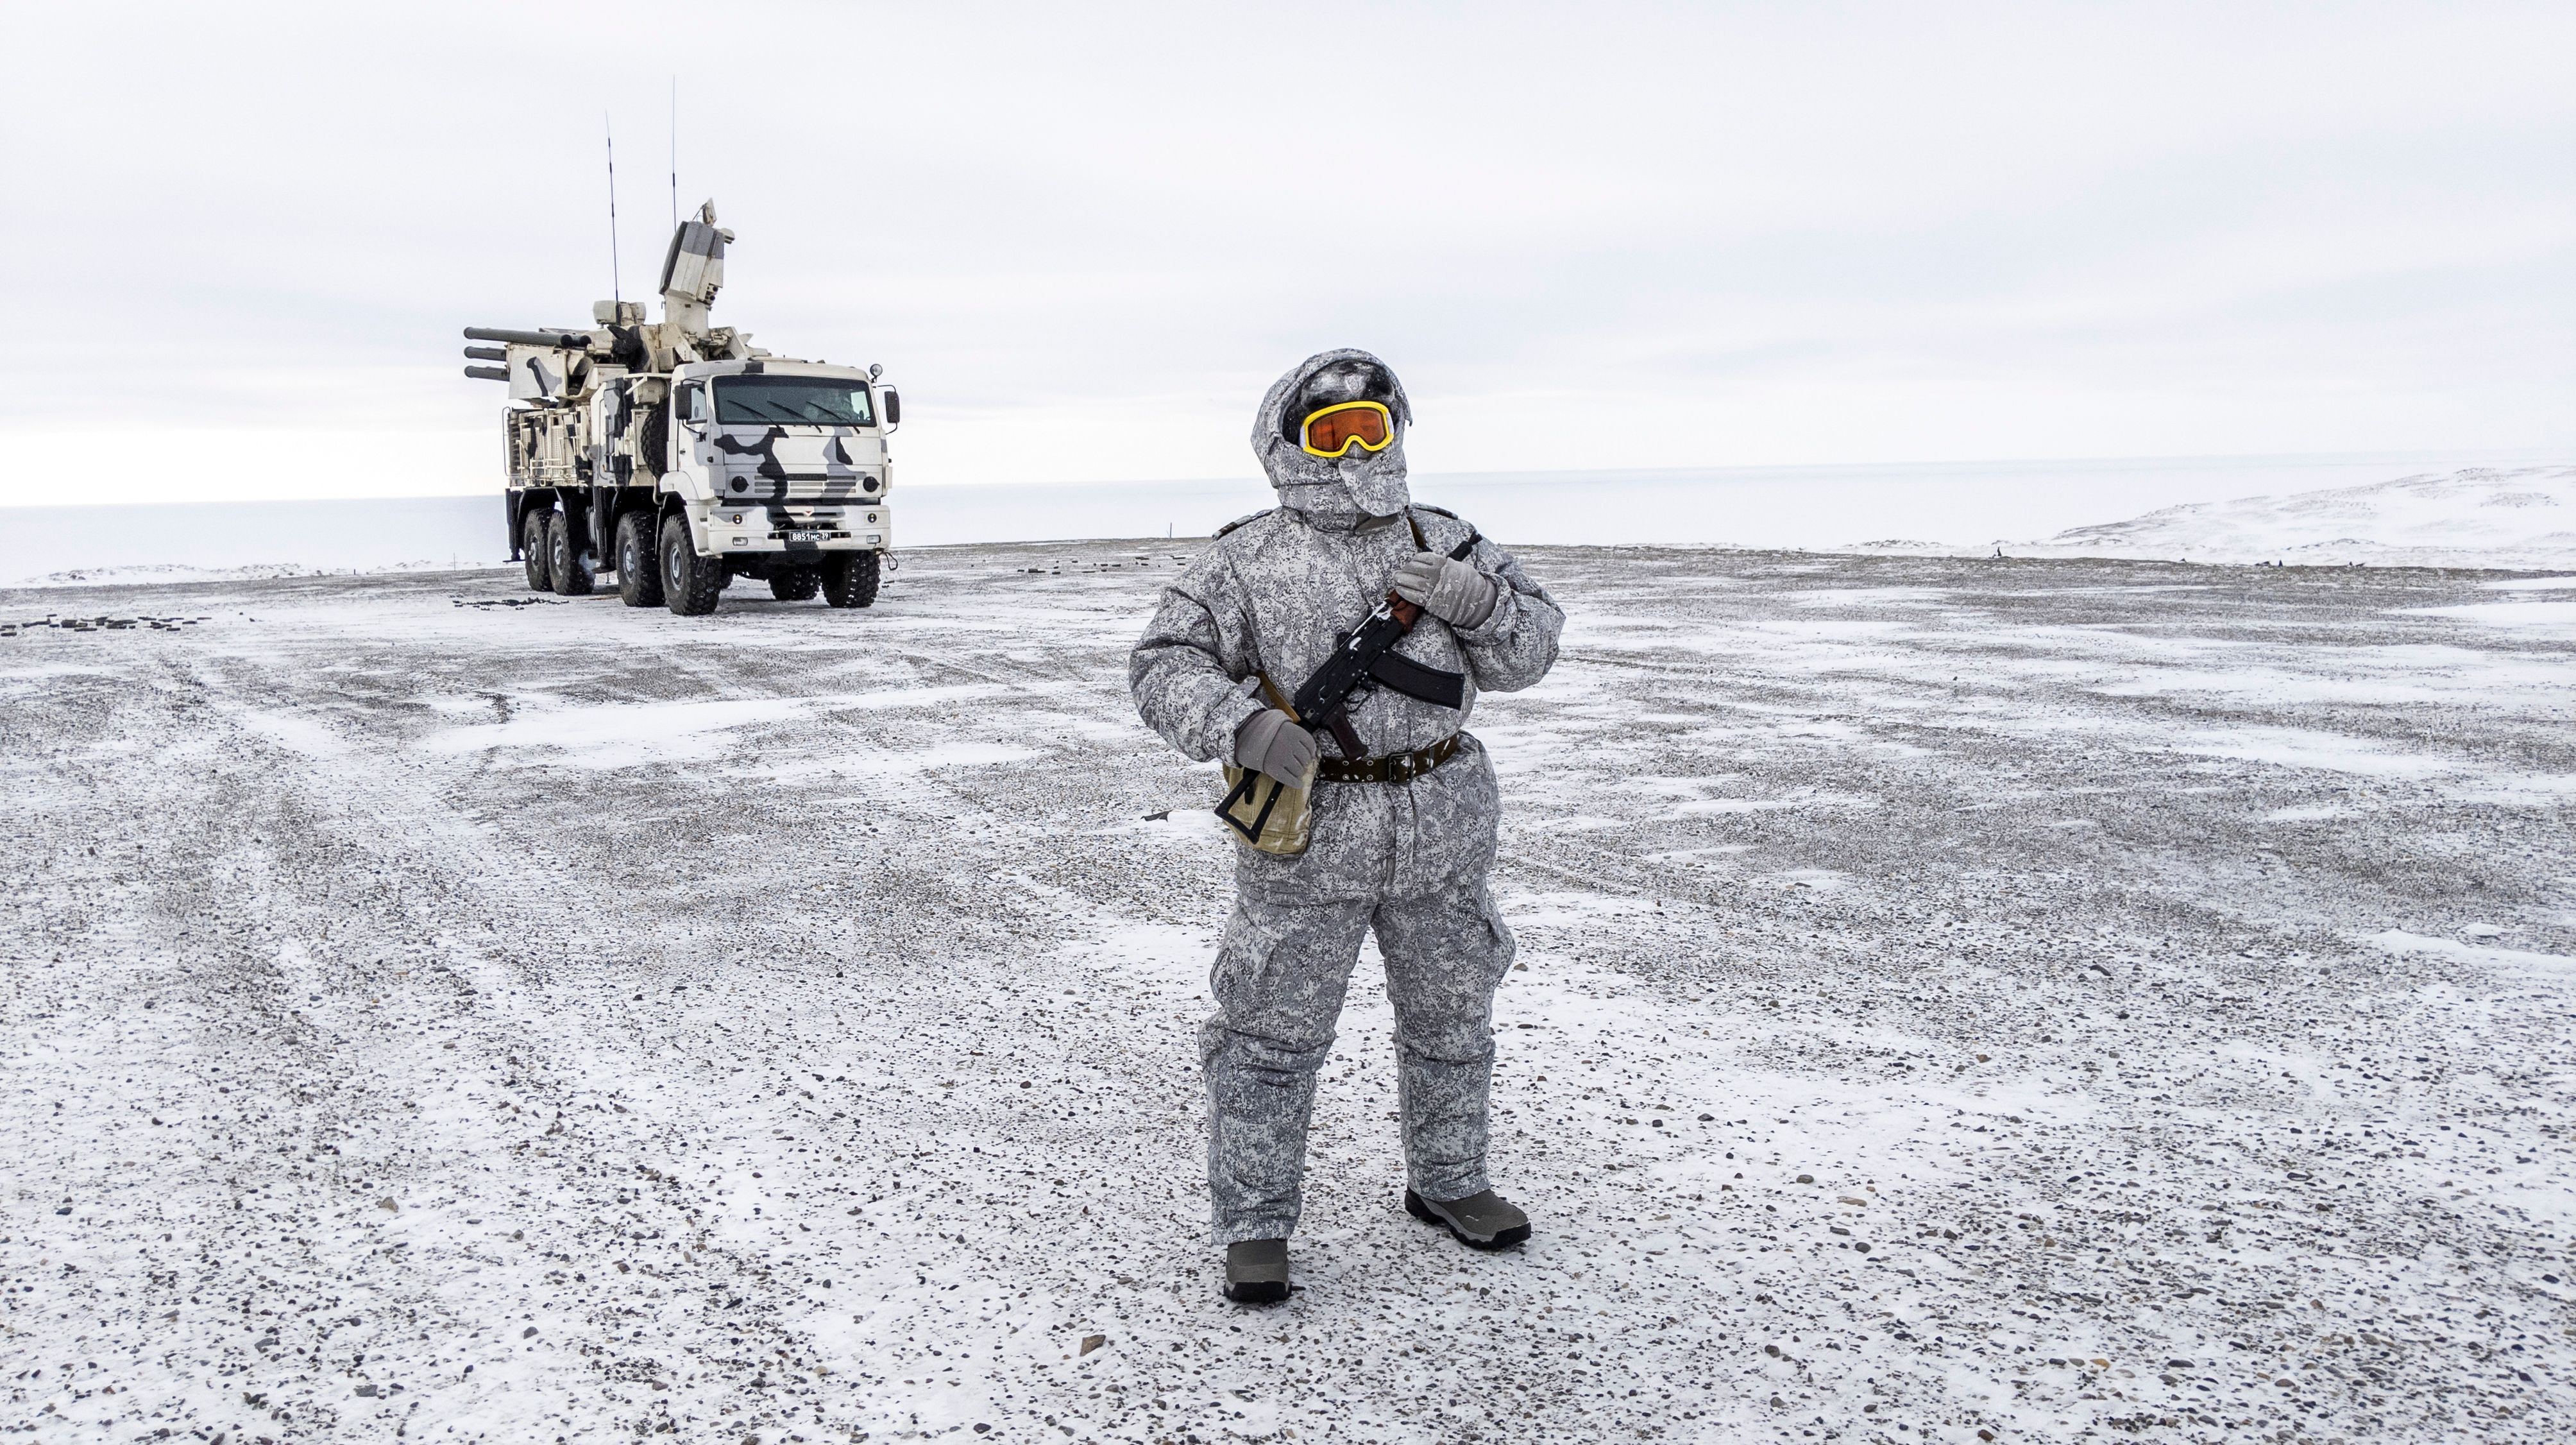 A soldier holds a machine gun as he patrols the Russian northern military base on Kotelny island, beyond the Arctic circle on April 3, 2019. The Arctic is a strategic region for Russia as it continues to strengthen its presence with the new perspectives offered by global warming. (Maxime Popov/AFP via Getty Images)